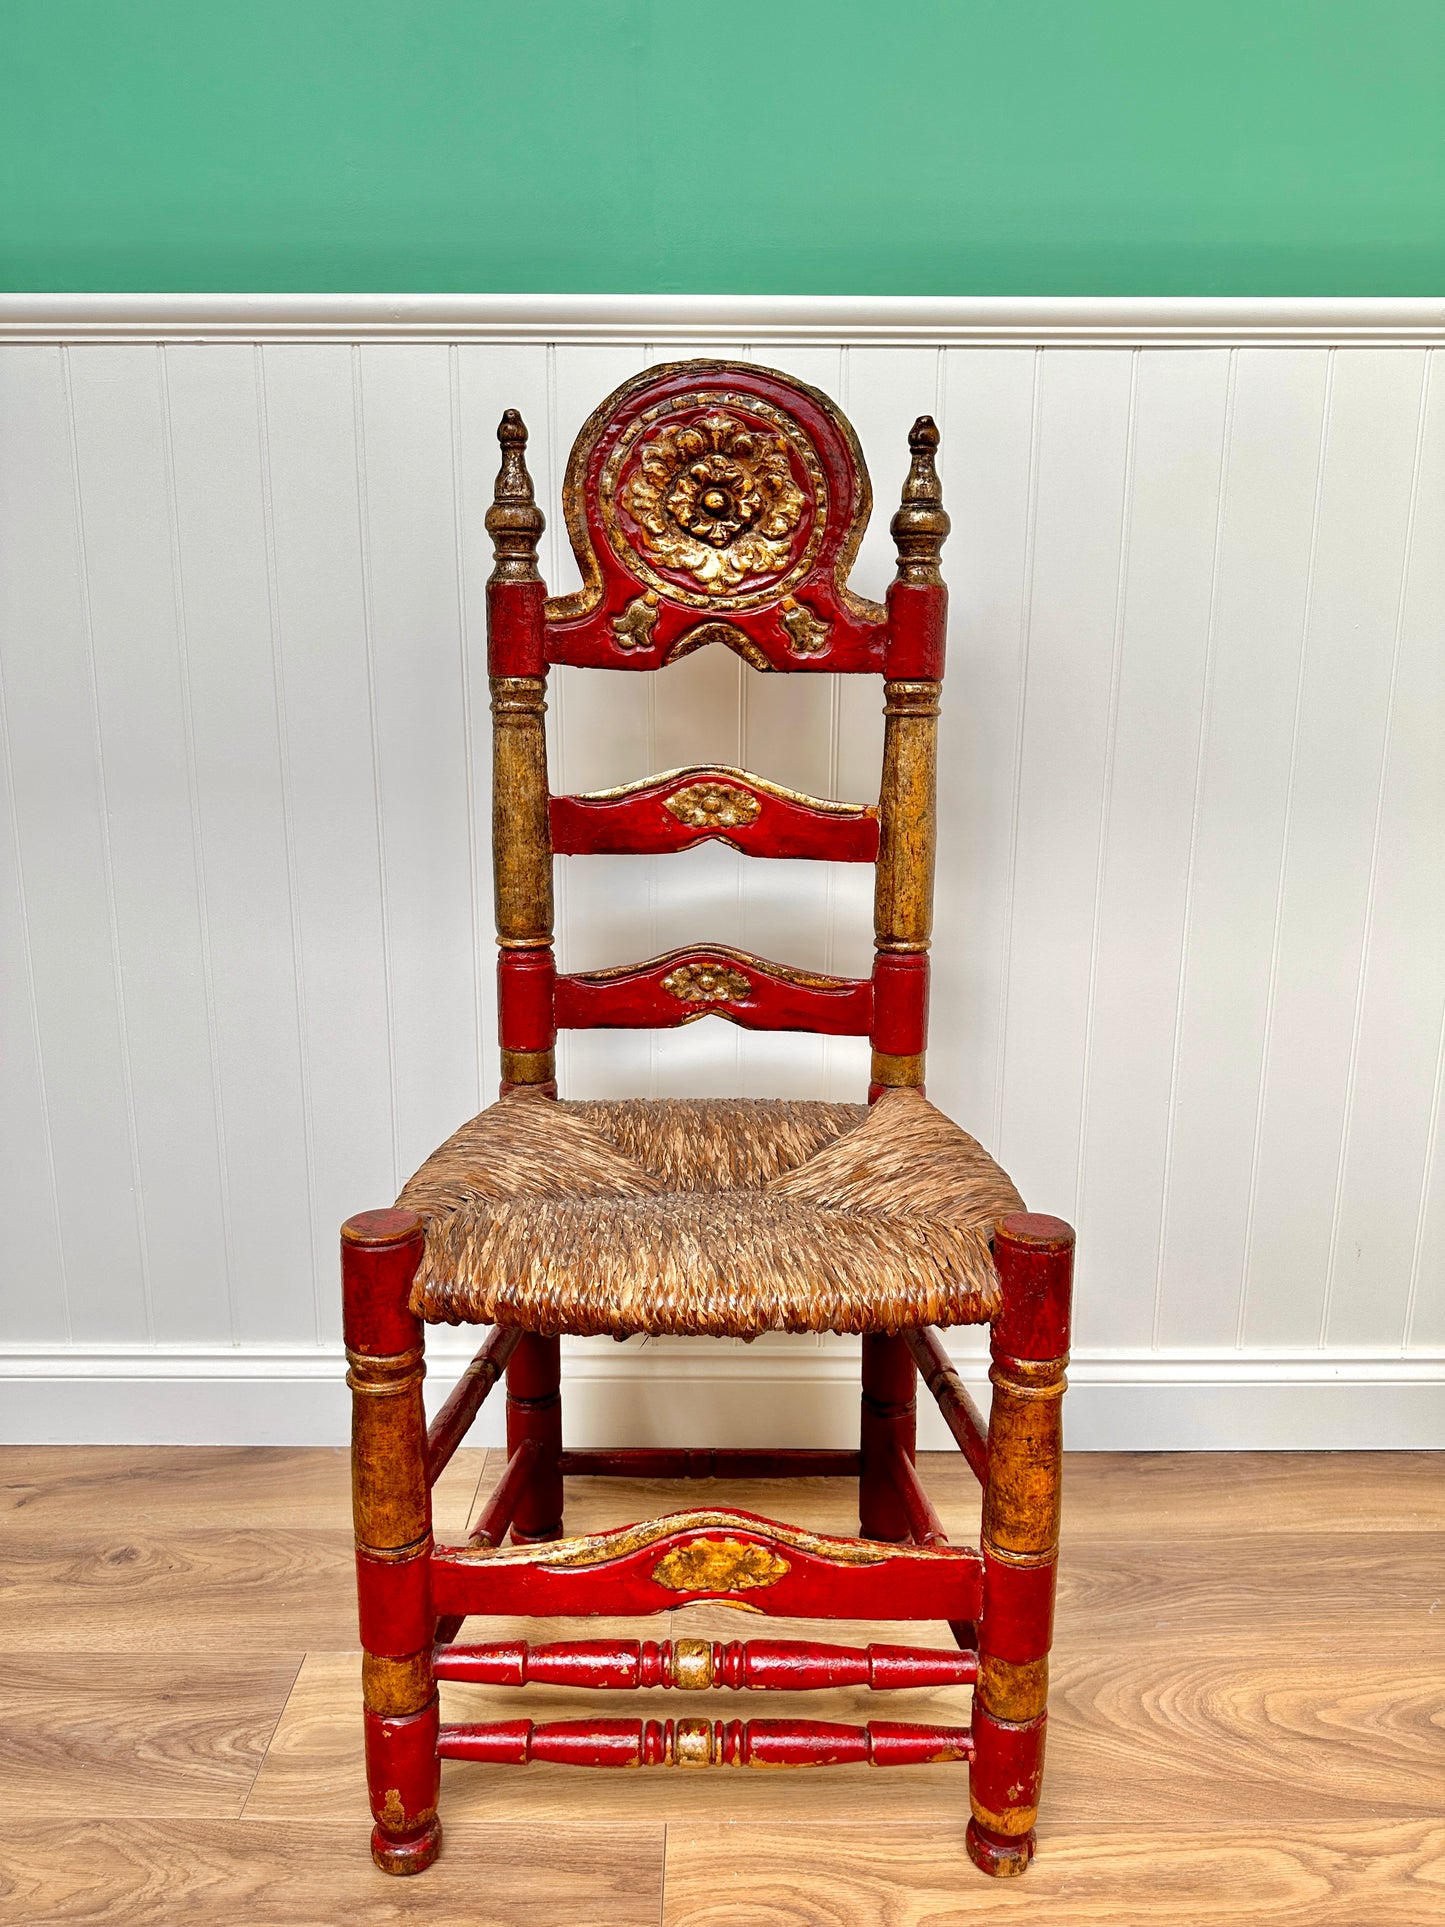 Large C19th Mallorcan Rush Seat Chair (Four Available)